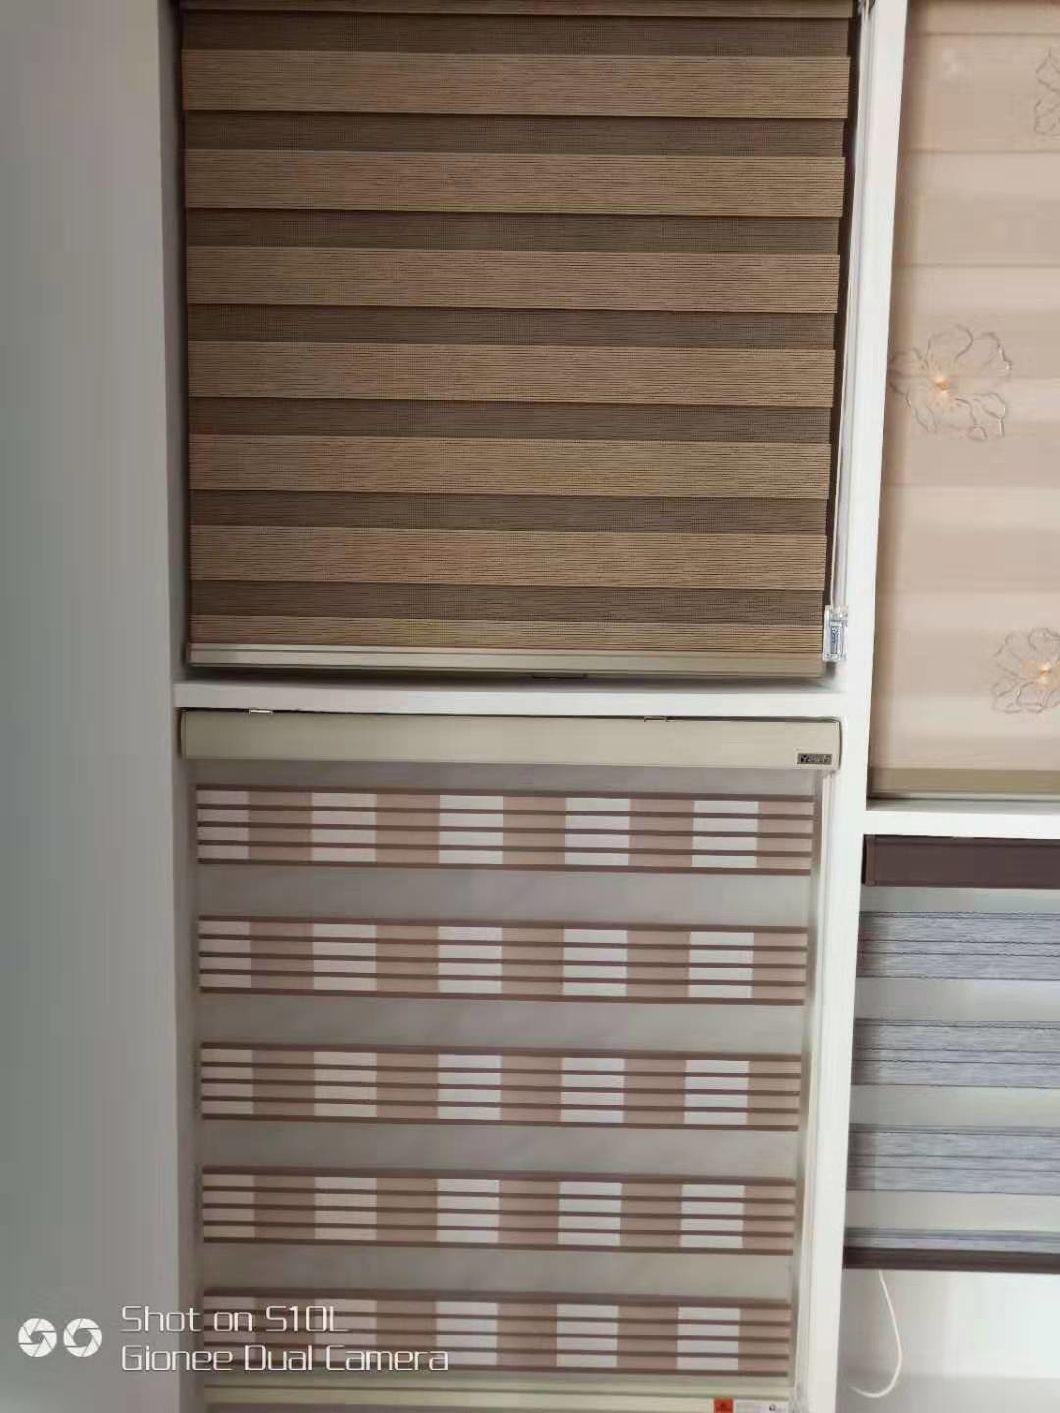 Blinds Manufacturer Supply Customized Zebra Blinds and Accessories